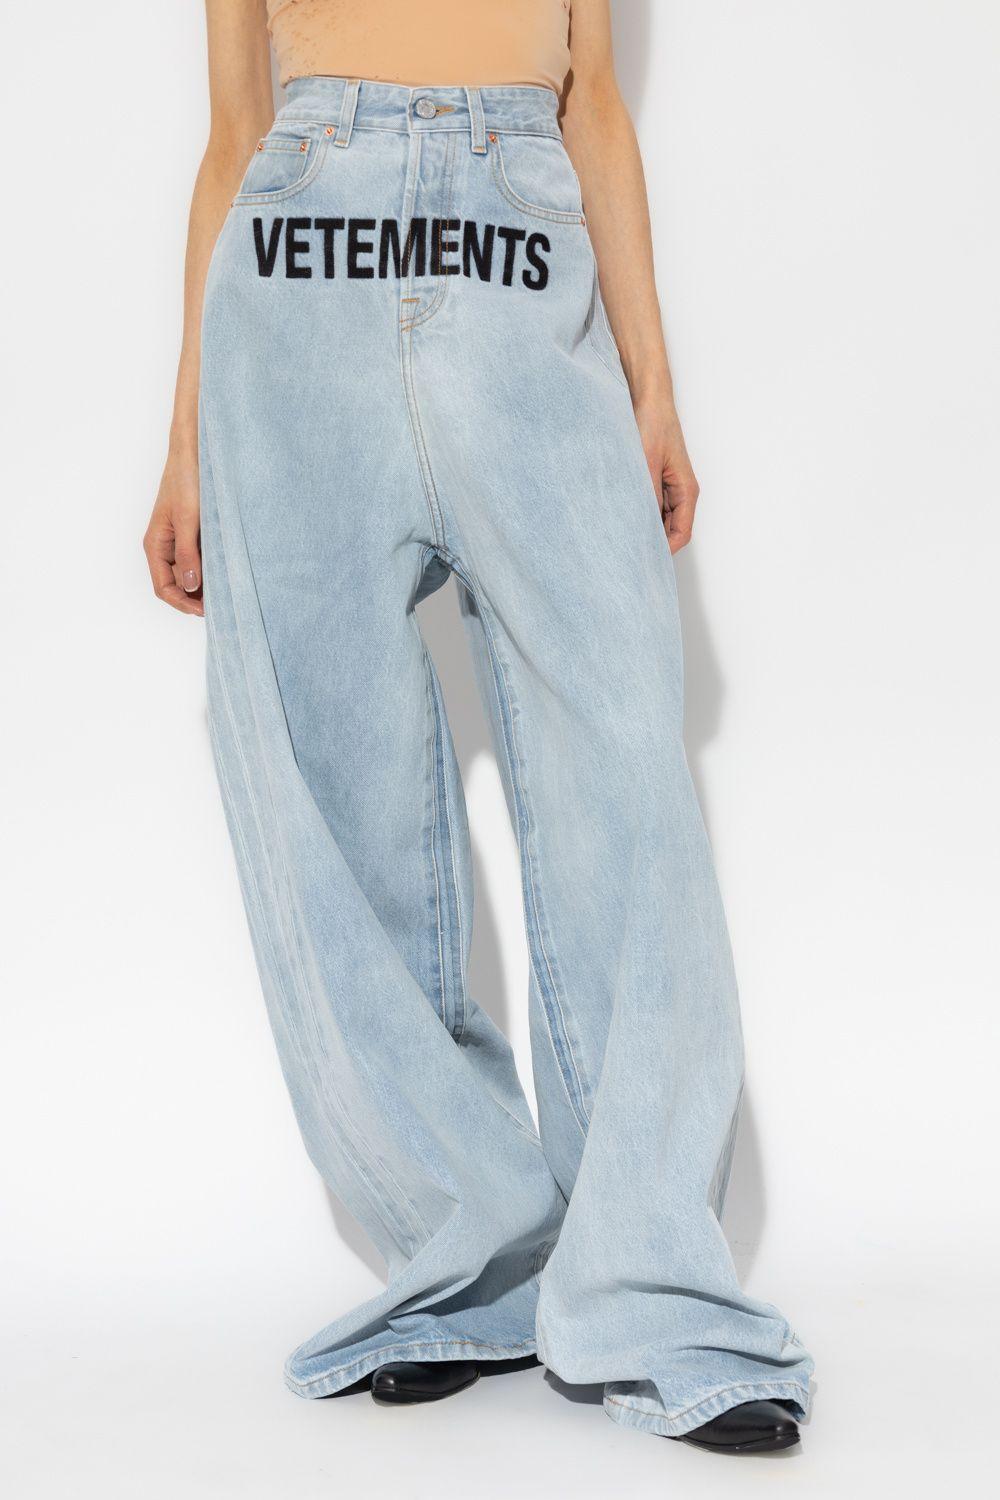 Vetements Jeans With Logo in |